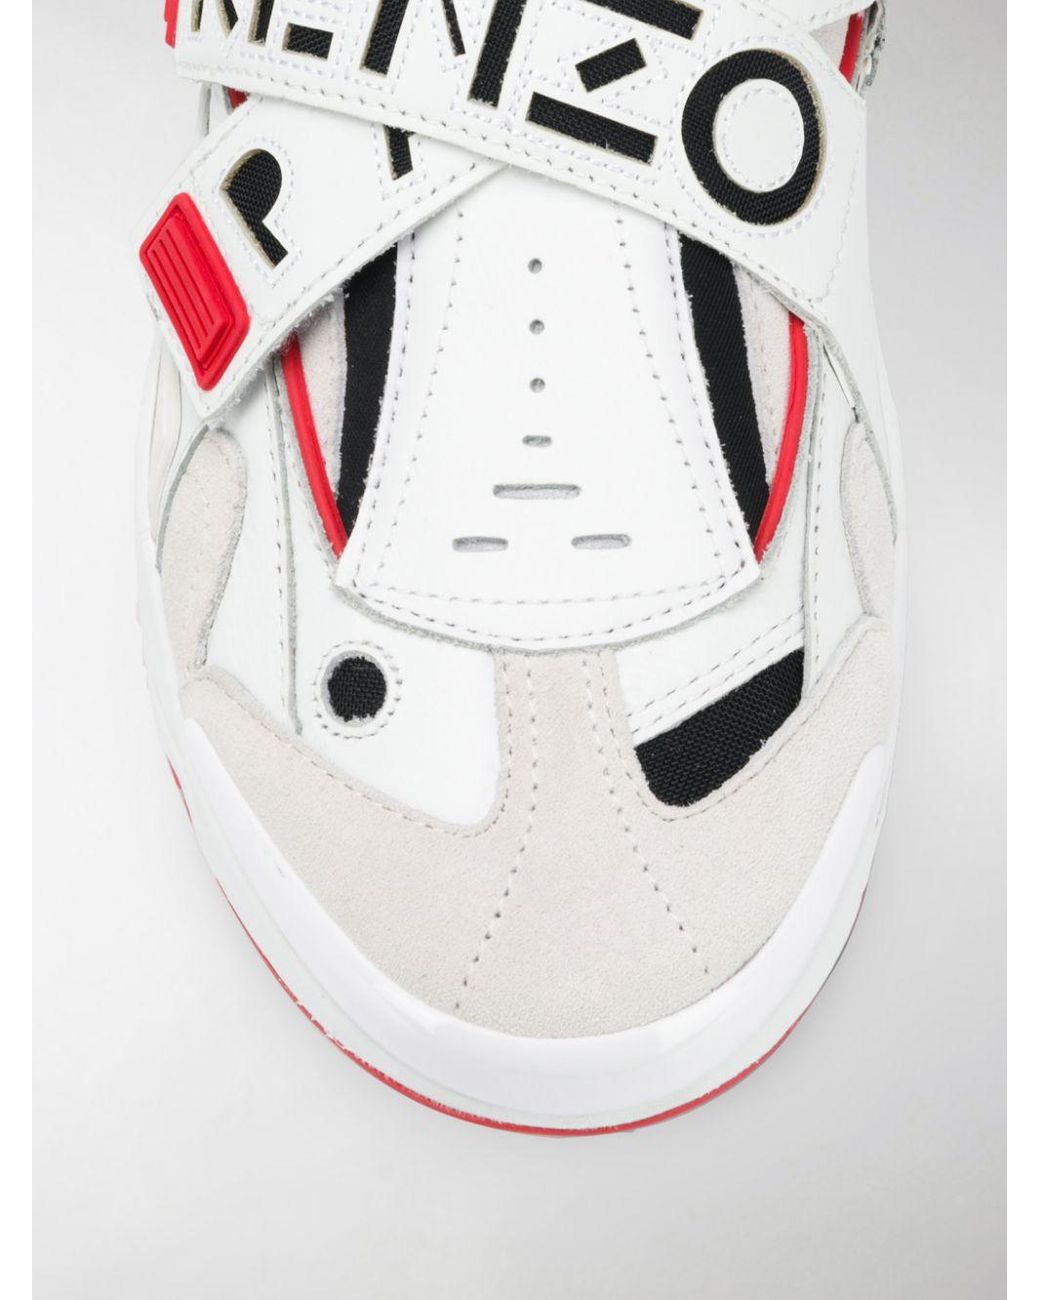 KENZO Sonic Velcro Sneakers In White And Red for Men | Lyst